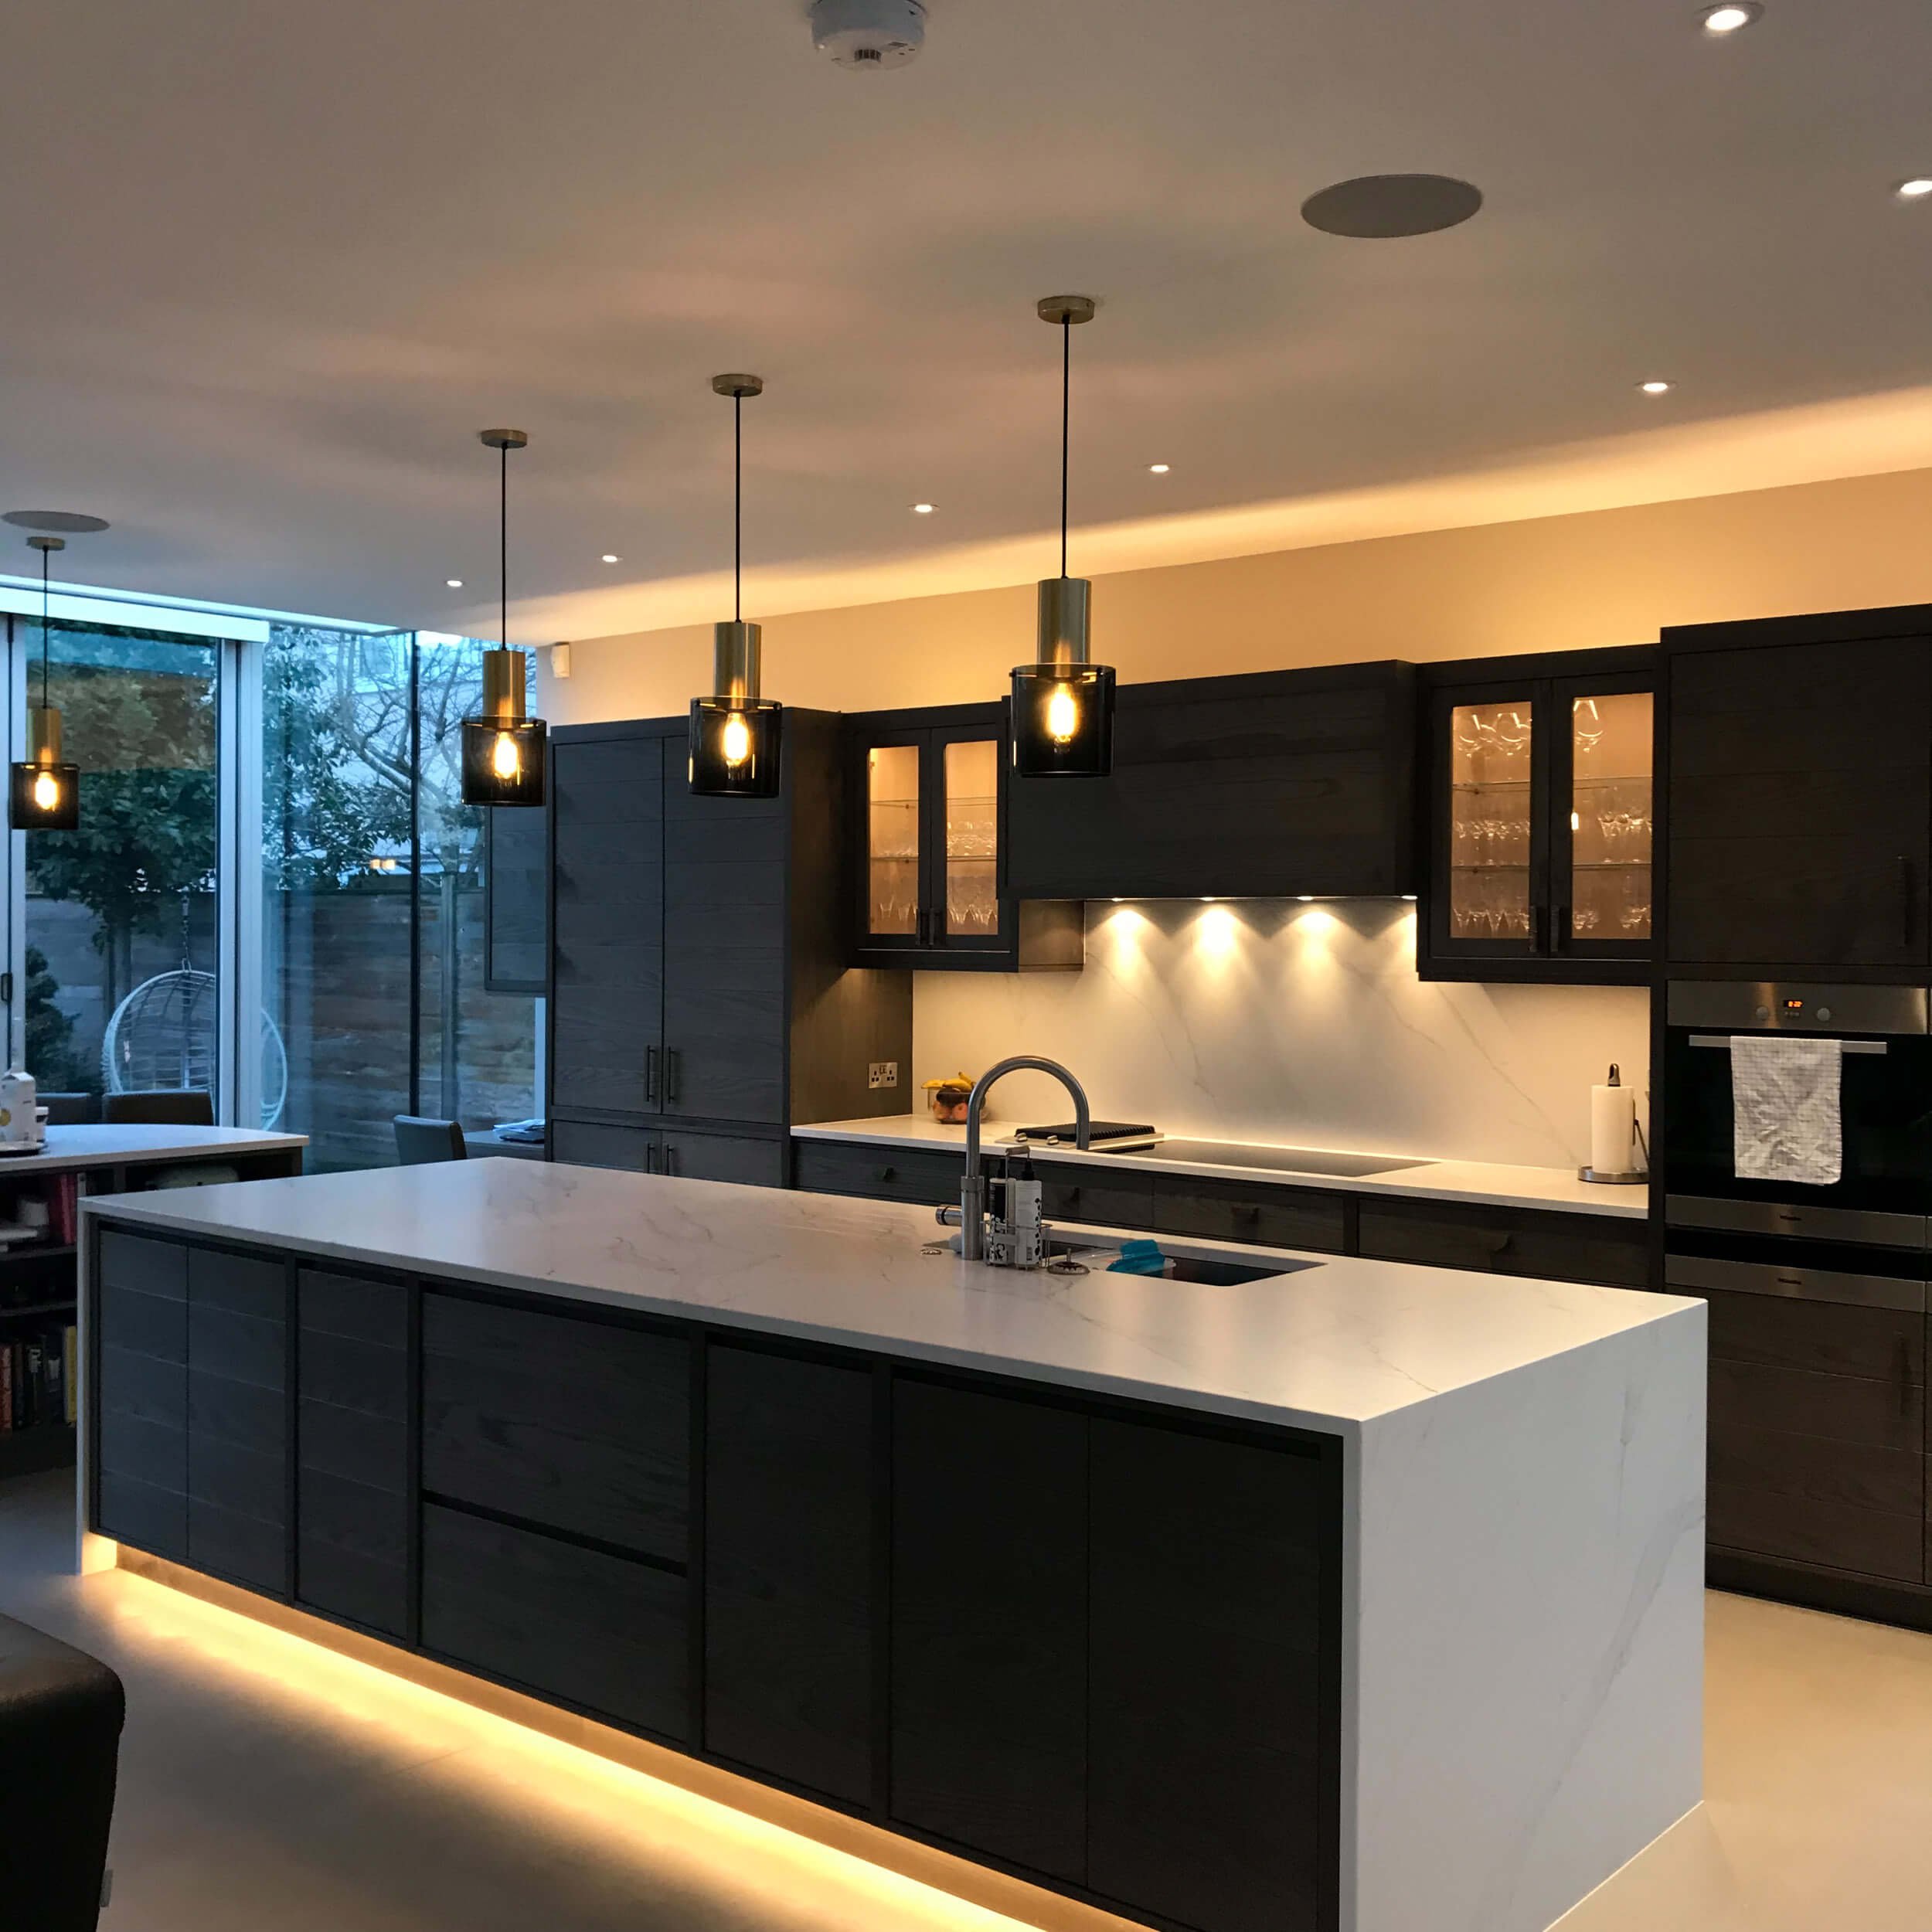 Electrical work in a residential kitchen